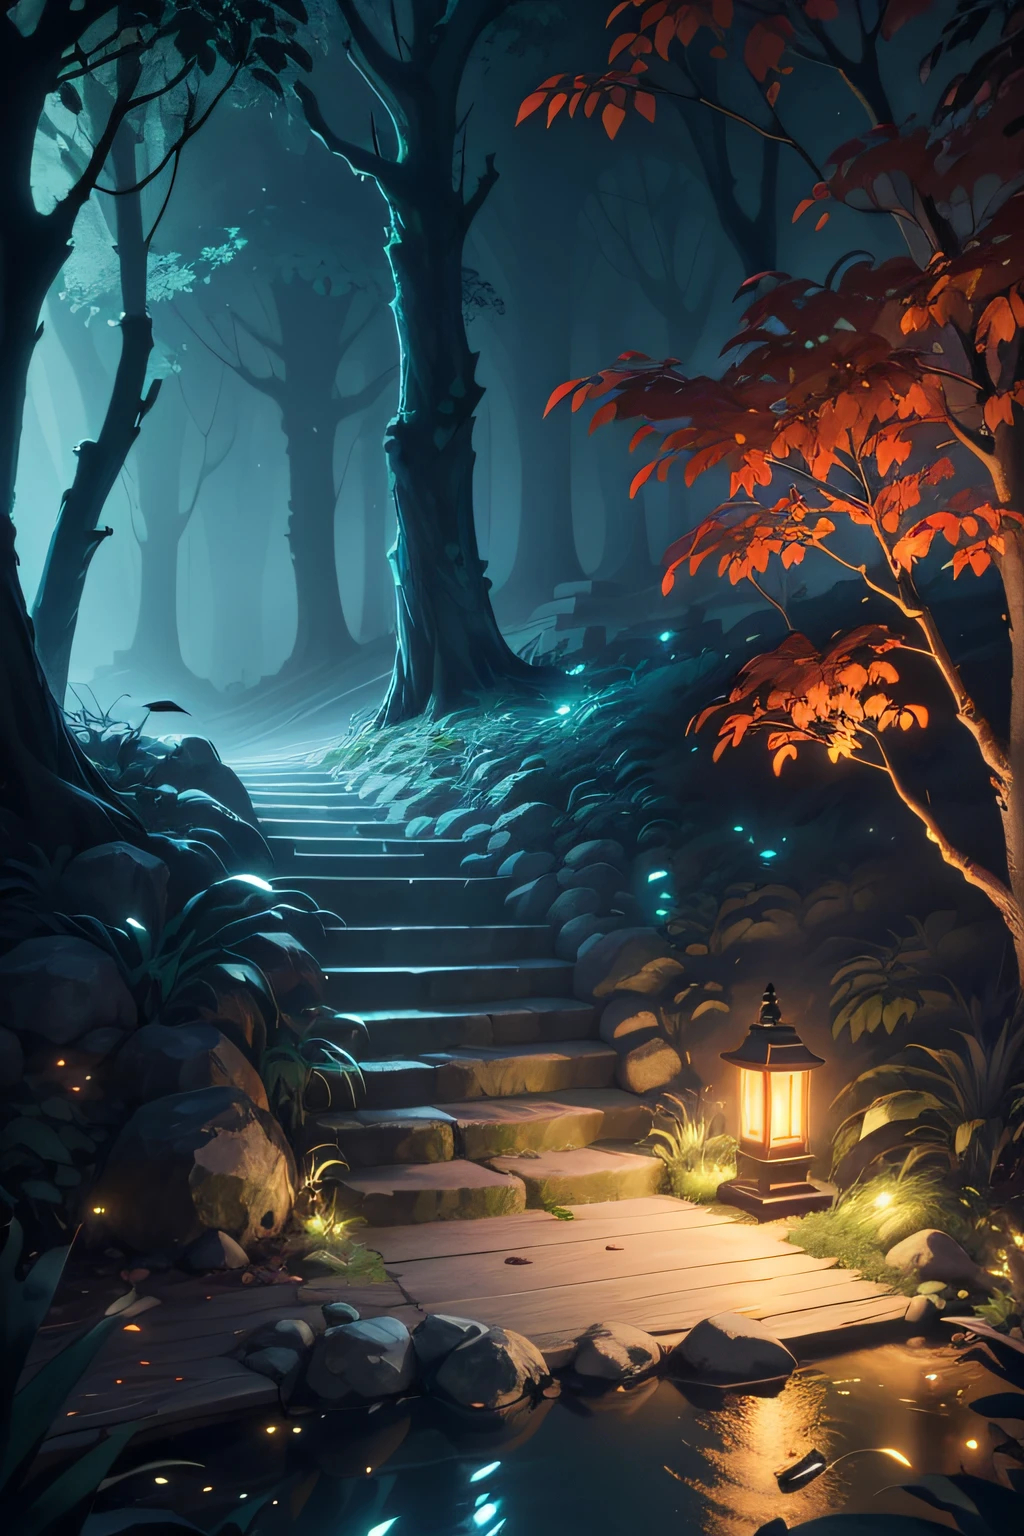 Masterpiece, best quality, (very detailed CG unity 8k wallpaper), (best quality), (best illustration), (best shadows), luminous sprite, mountain stream, (ancient Chinese architecture), stream, clear water near the lake, natural elements in a forest theme. Night Mysterious Forest, beautiful night forest, lotuses in the water, stone steps, stone bridge, night nature surrounded by night flowers, leaves and red branches surrounded by fireflies (natural elements), (night blackout), (night dark sky), (night jungle theme), (red glowing grass), (leaves), (branches), (red fireflies), (particle effects), 3D, dark background, Octane rendering, ray tracing, super detail, night, moon